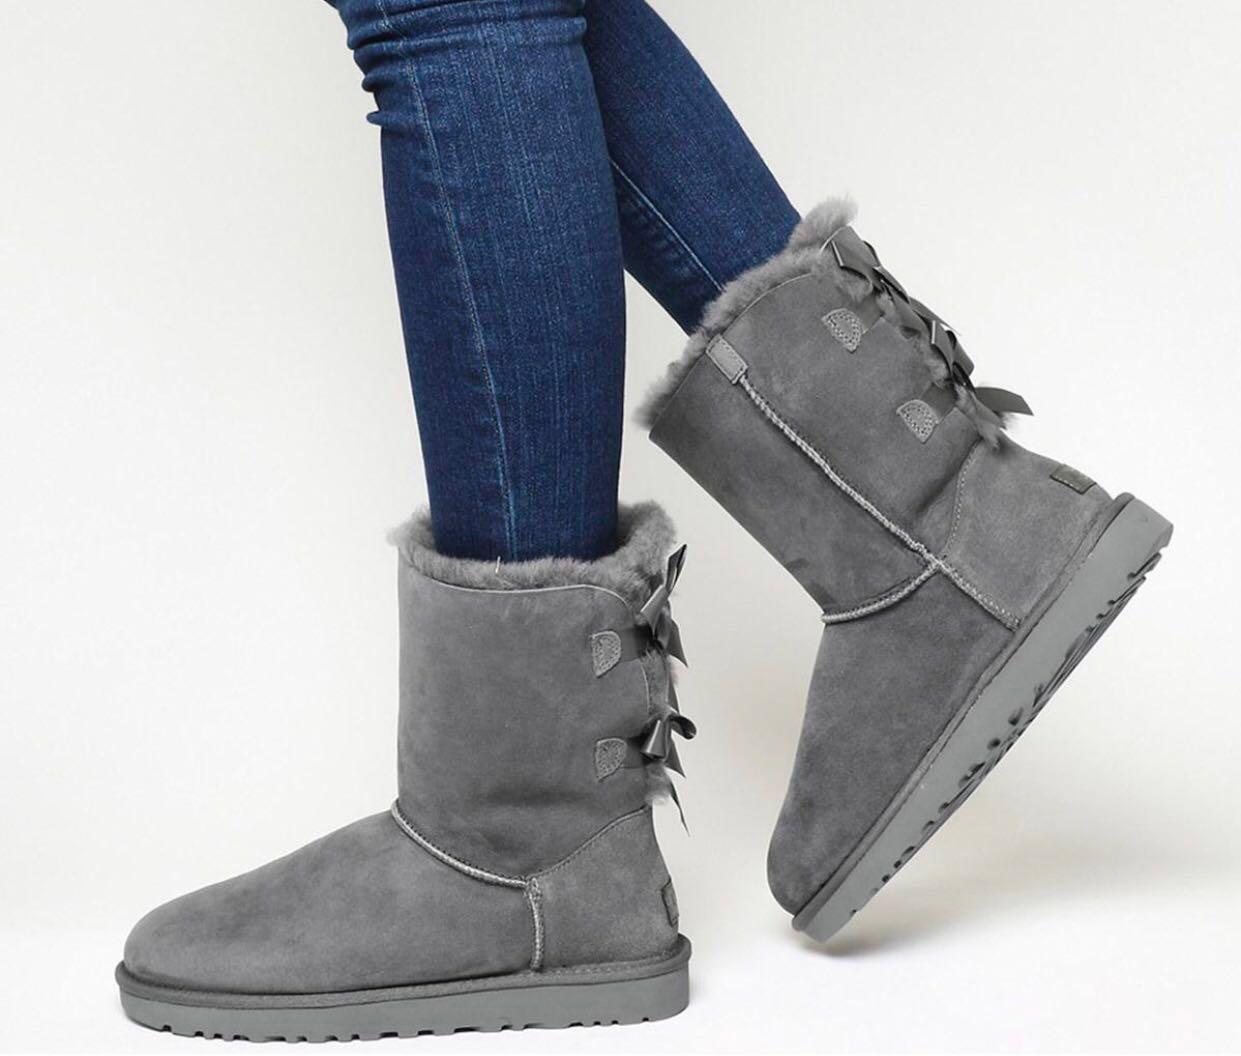 blue ugg boots with bows